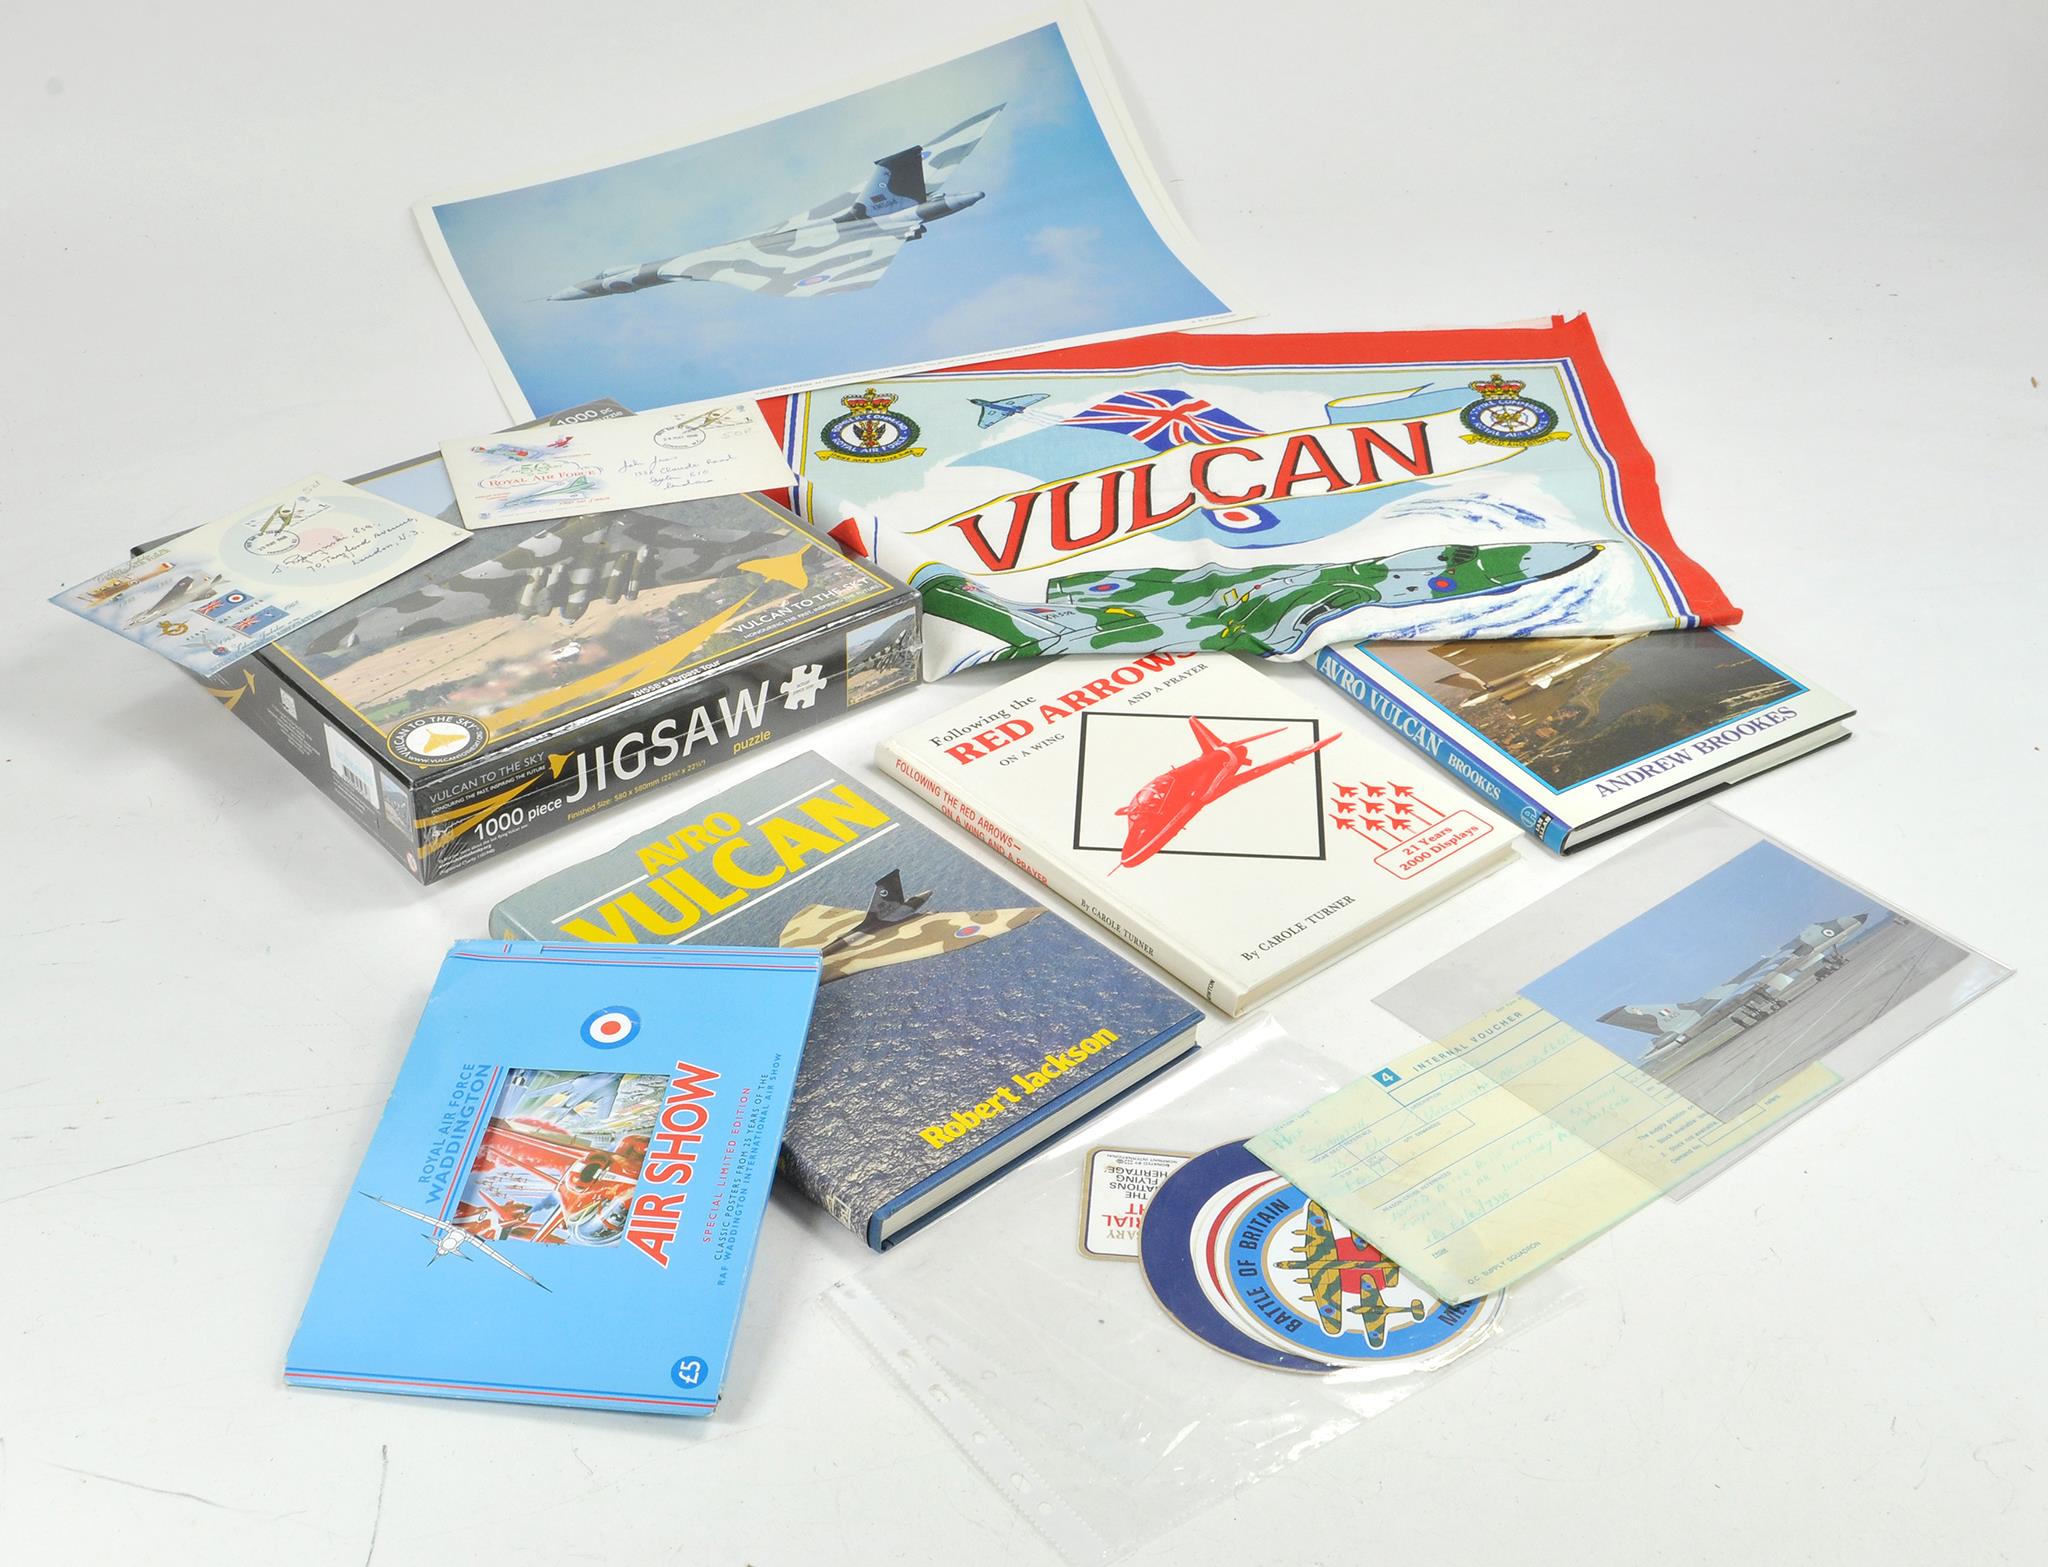 An impressive Assortment of Avro Vulcan Aircraft collectables comprising books, pictures and other